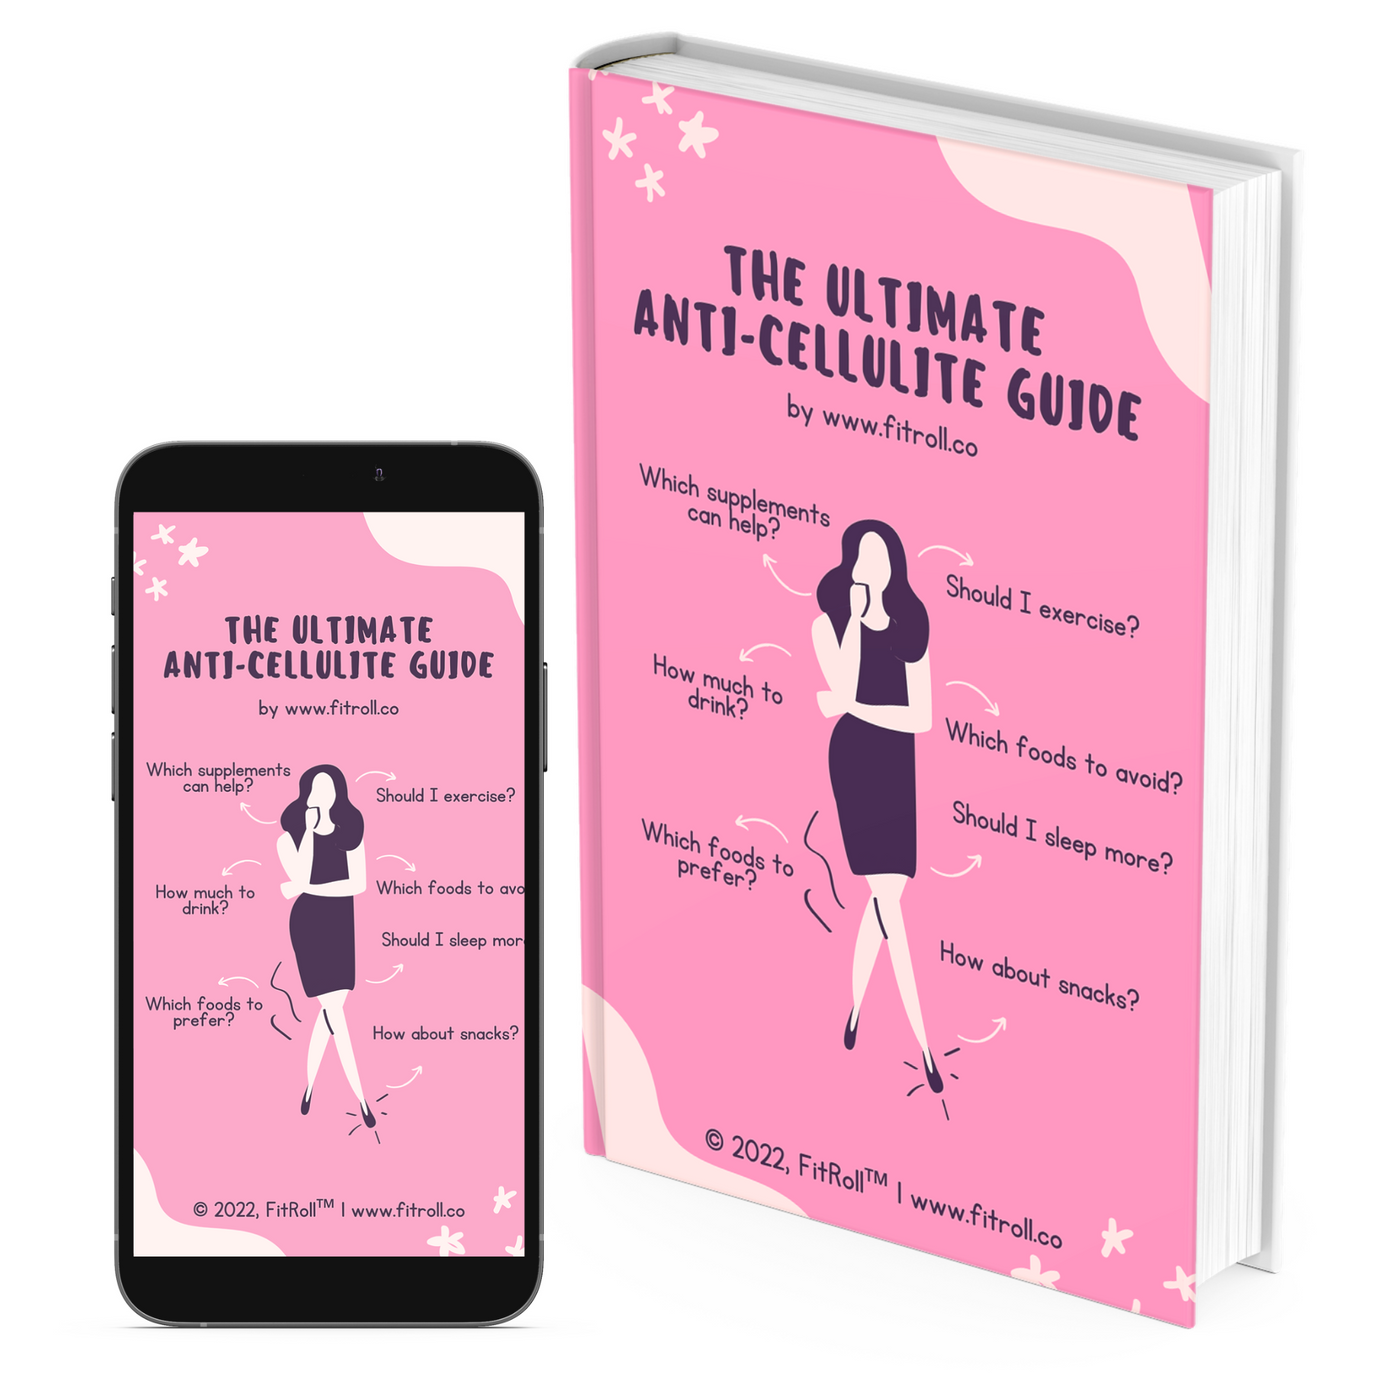 The Ultimate Anti-Cellulite Guide by FitRoll